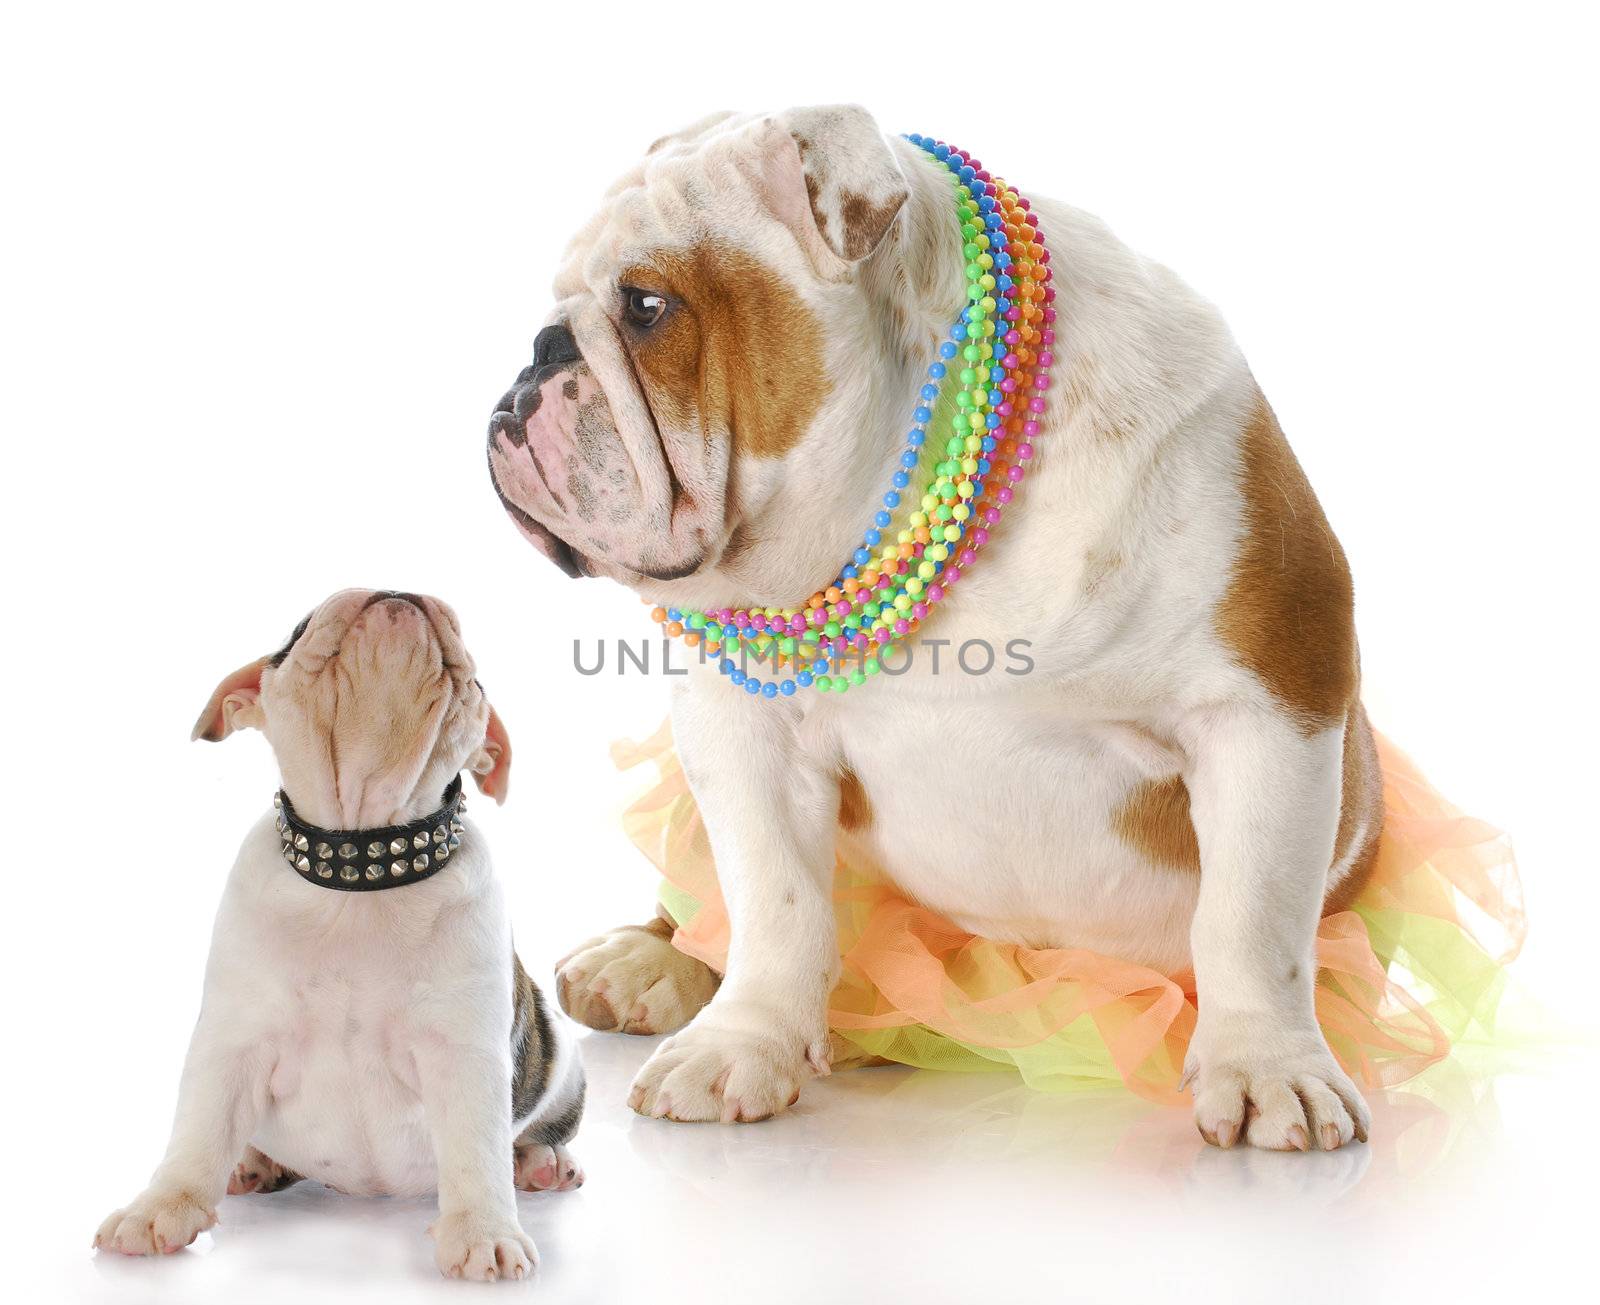 english bulldog mother sitting with puppy looking up at her face with reflection on white background